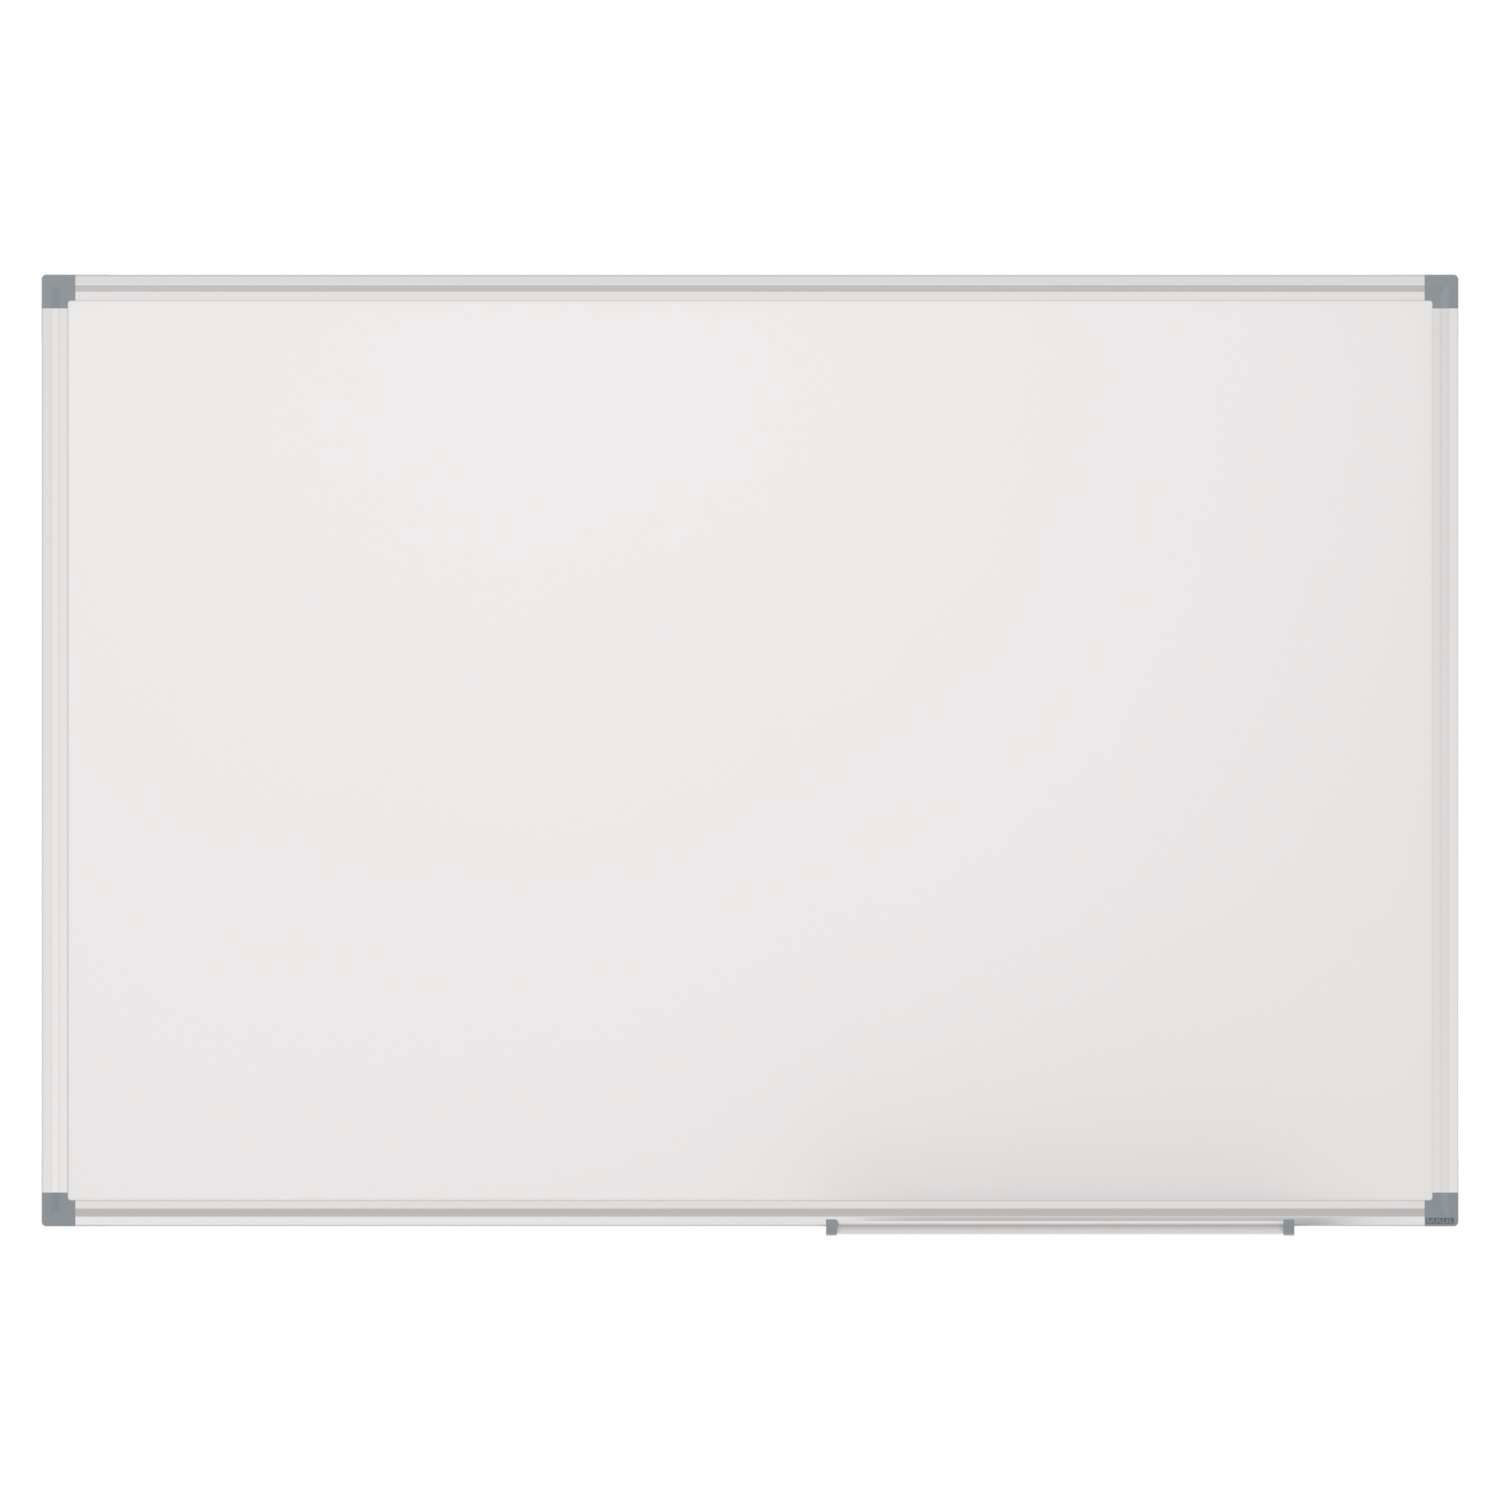 Whiteboard MAULstandard, Emaille, 120x200 cm